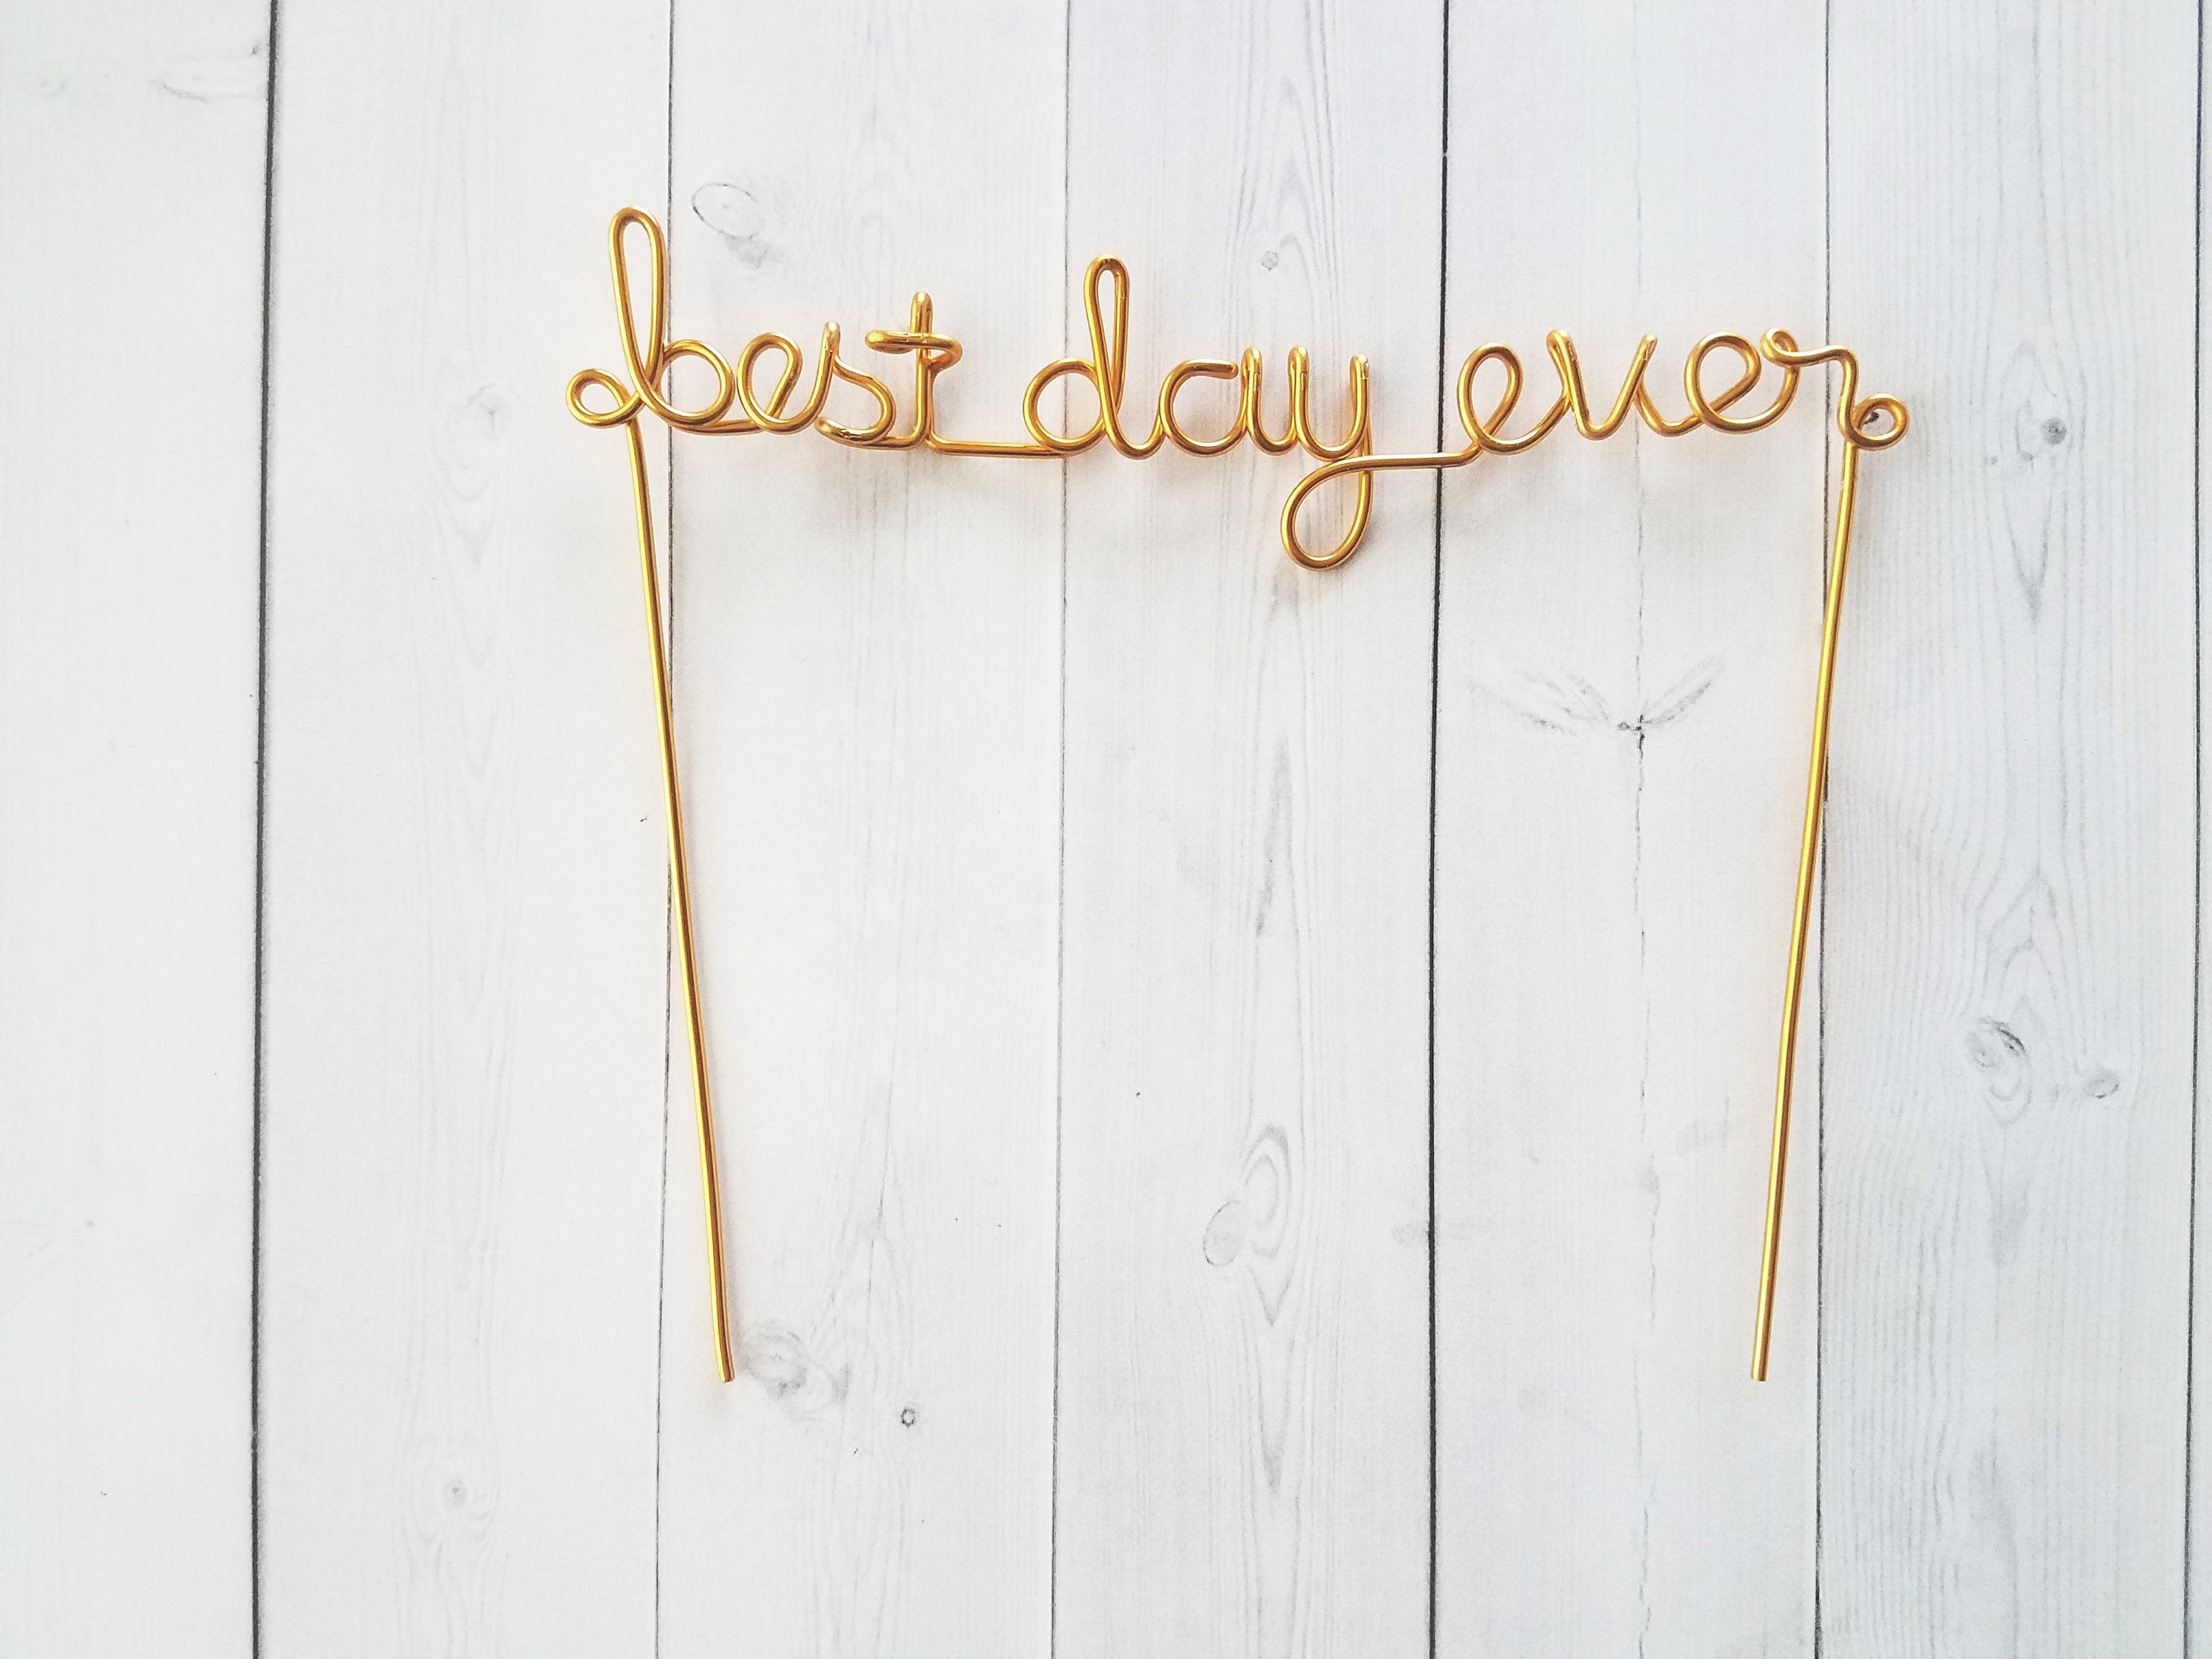 Best Day Ever Wire Cake Topper